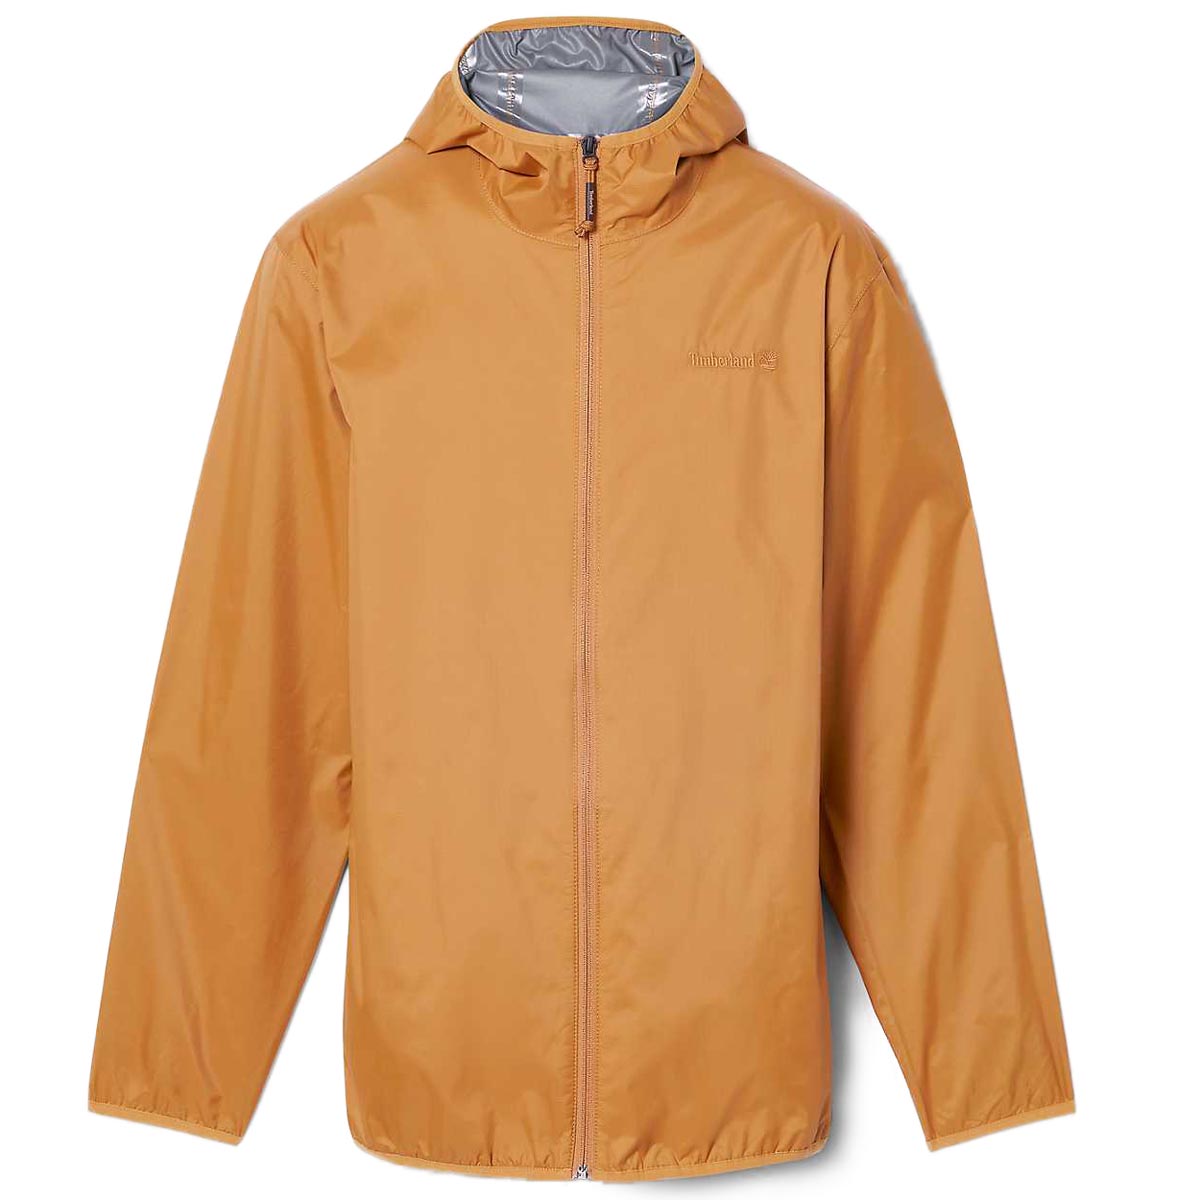 Timberland 2.5l Wind Resistant Jacket - Wheat image 4